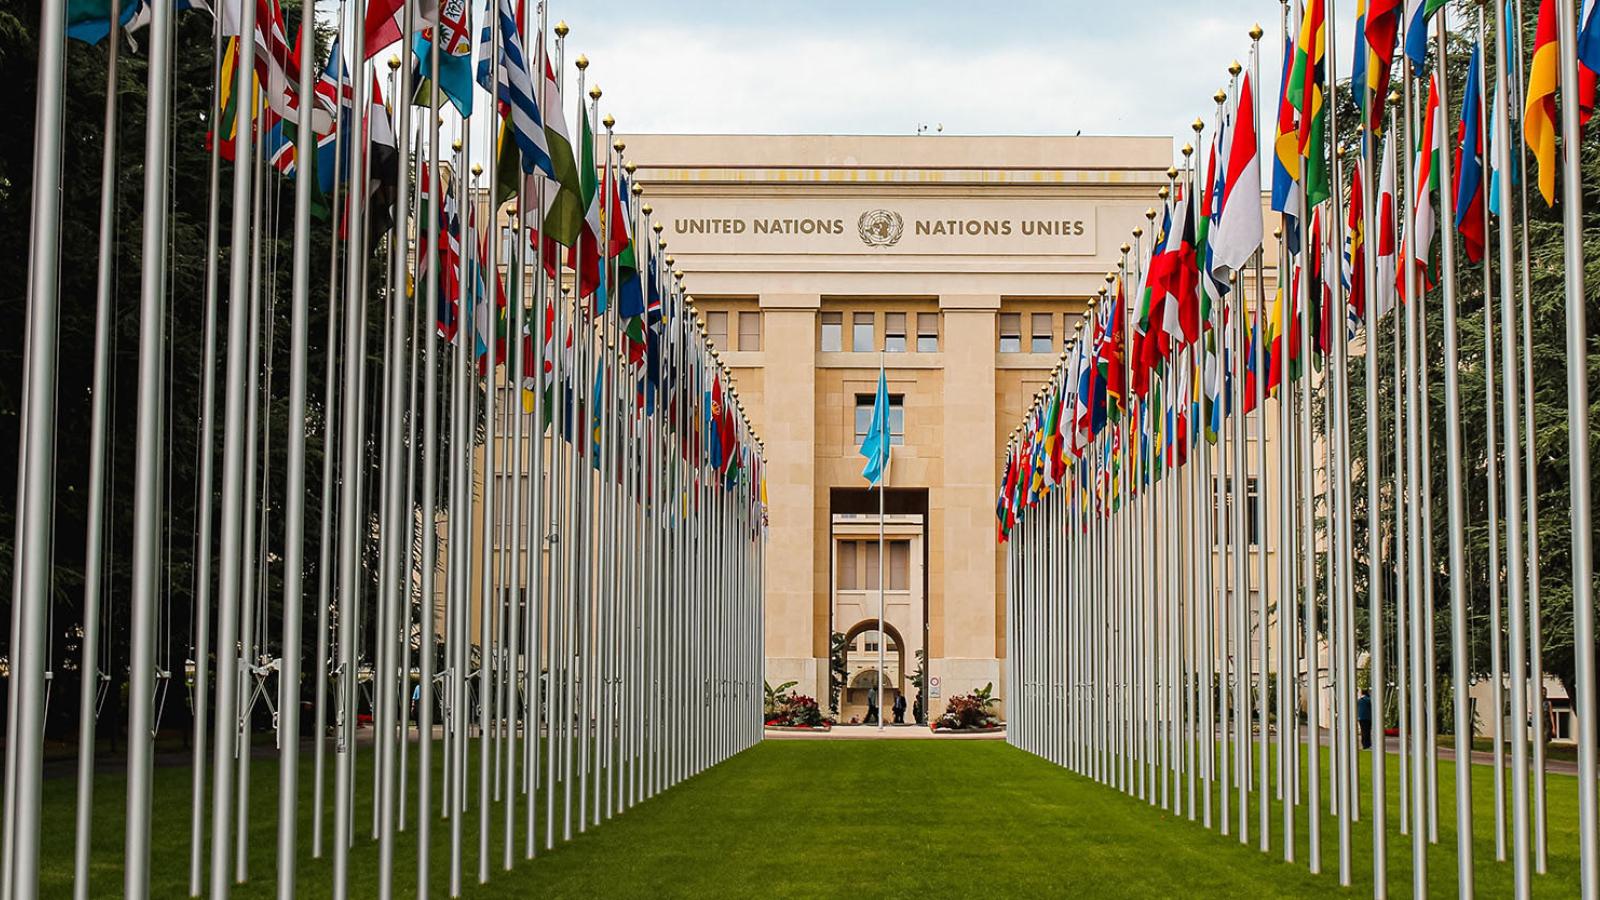 Flags of the world lined up leading to the United Nations